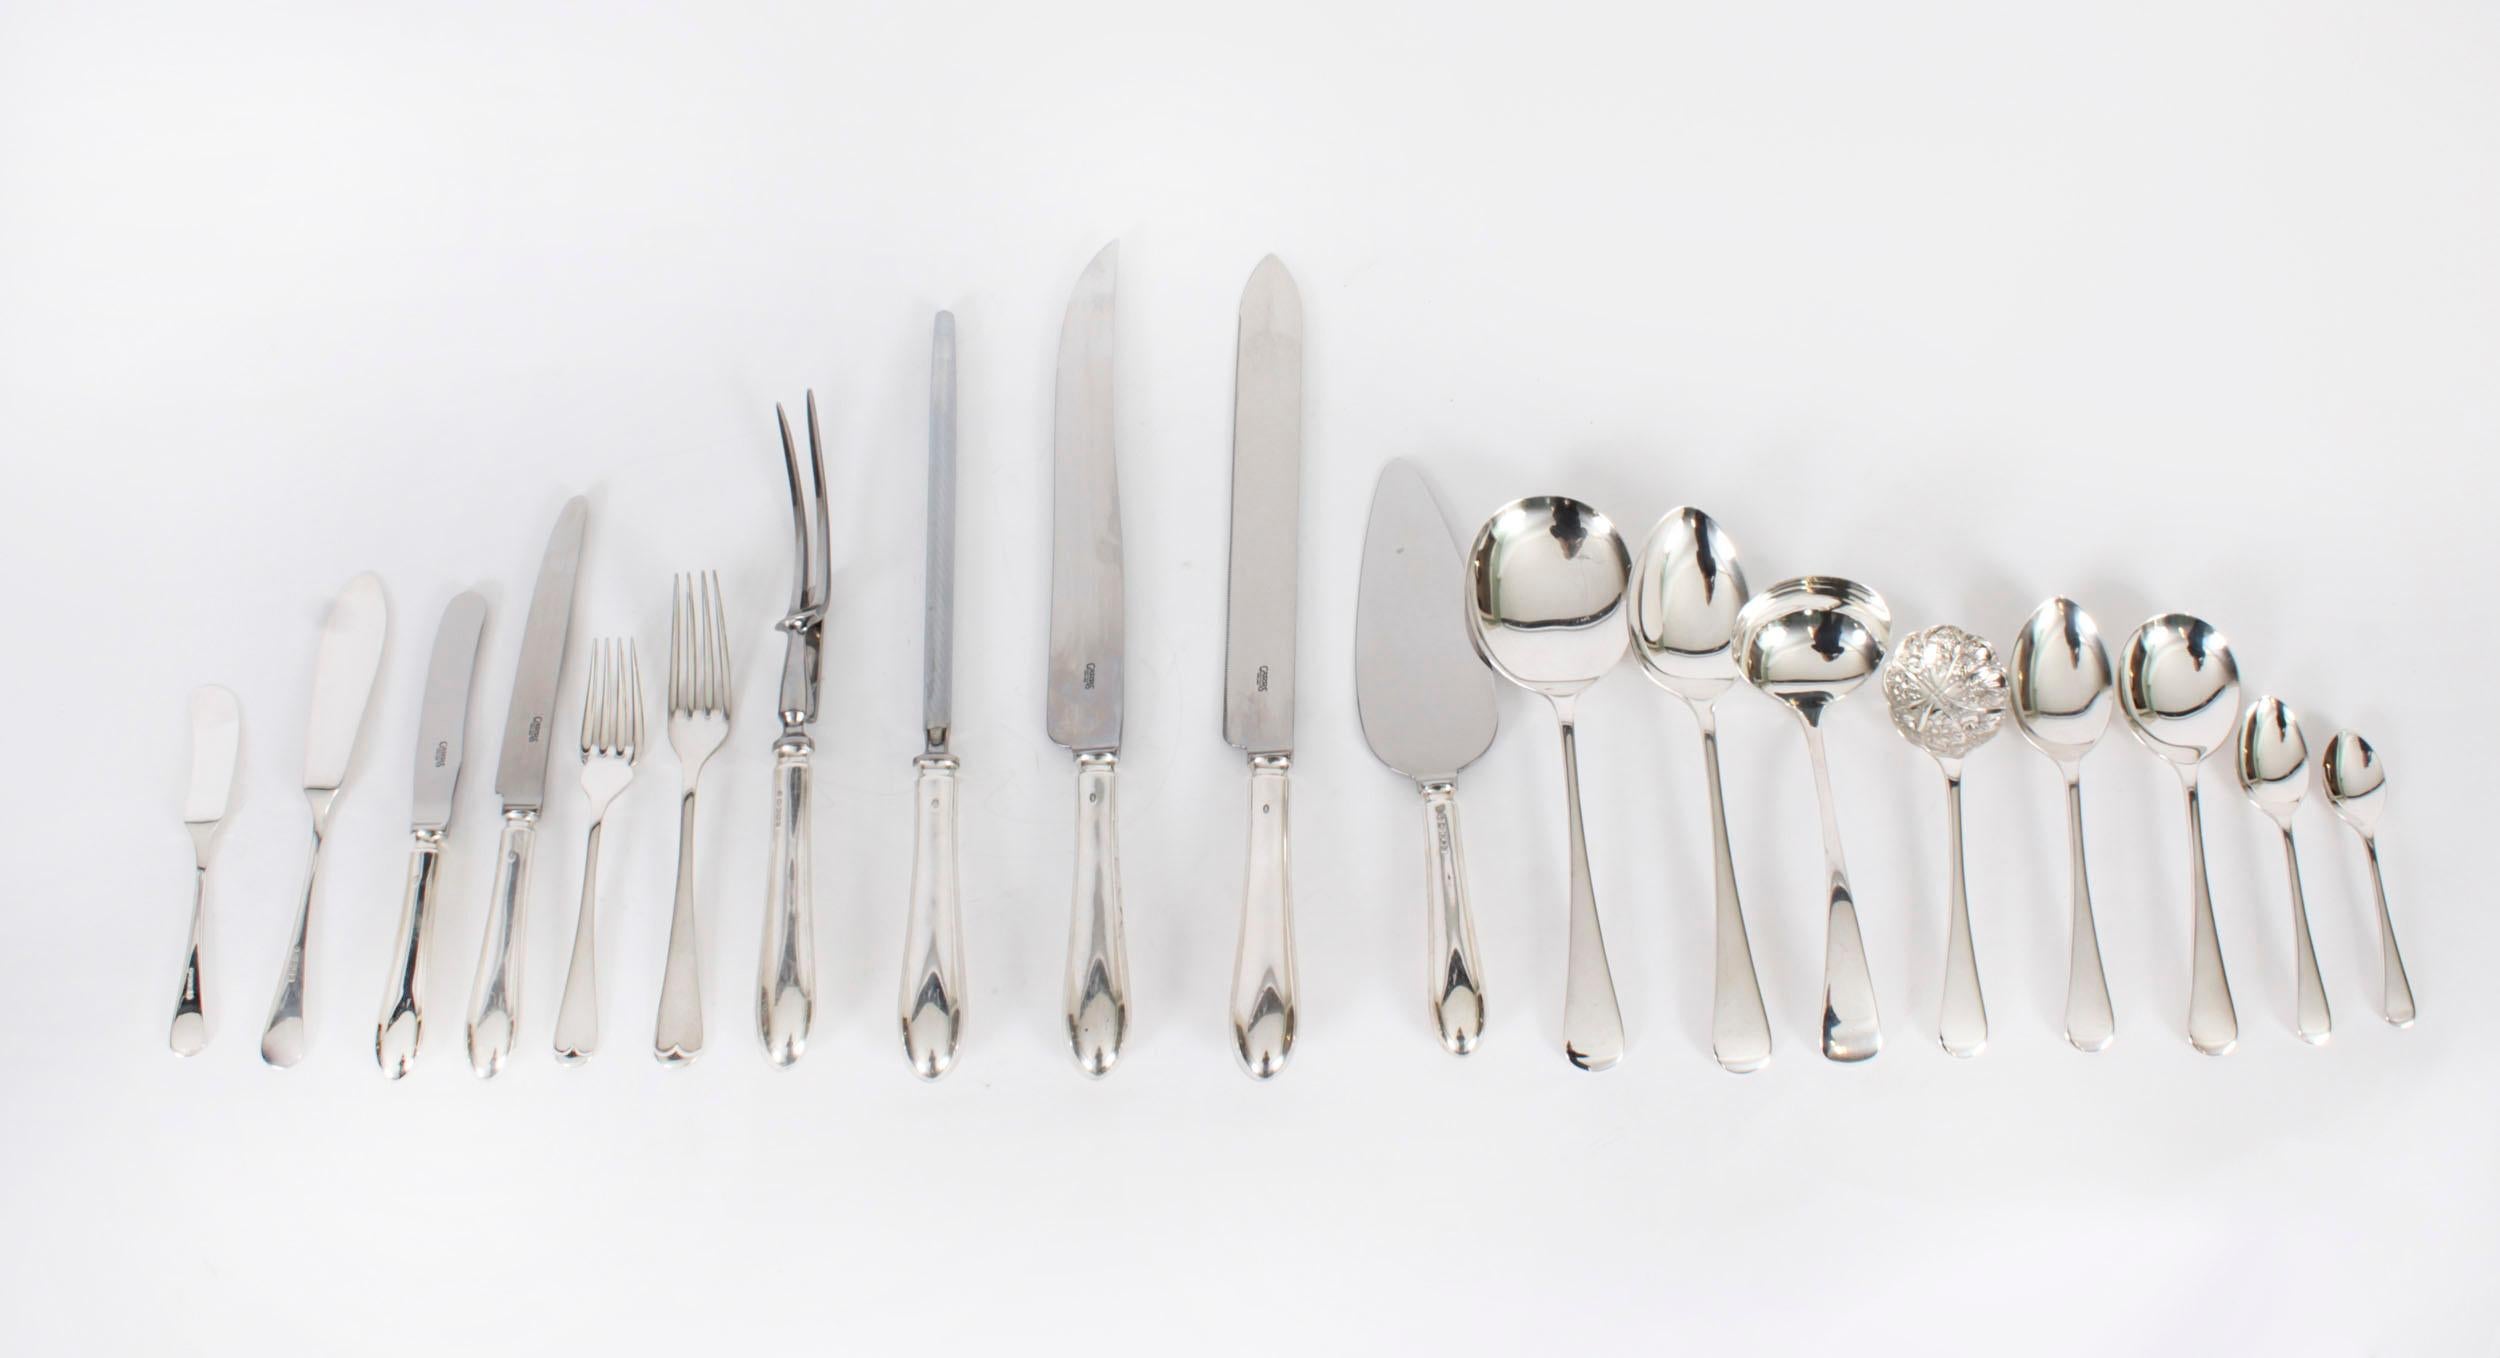 English Vintage150 Piece Canteen-12 Place Sterling Silver Cutlery Set by Carrs 2004 For Sale